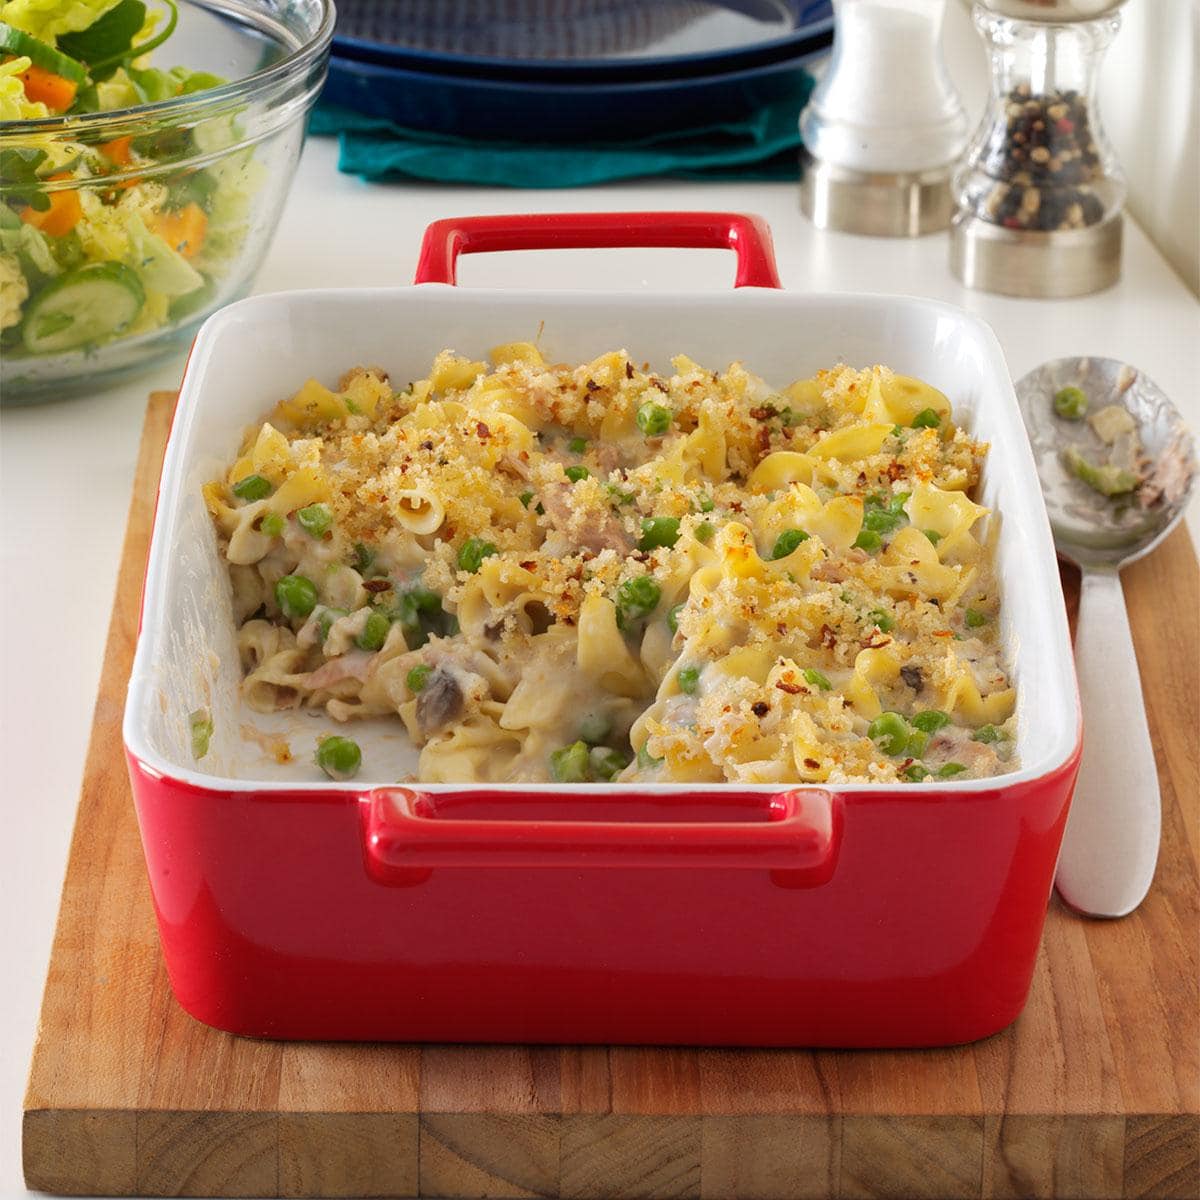 Creamy Tuna Noodle Casserole with Green Peas and Bread Crumbs